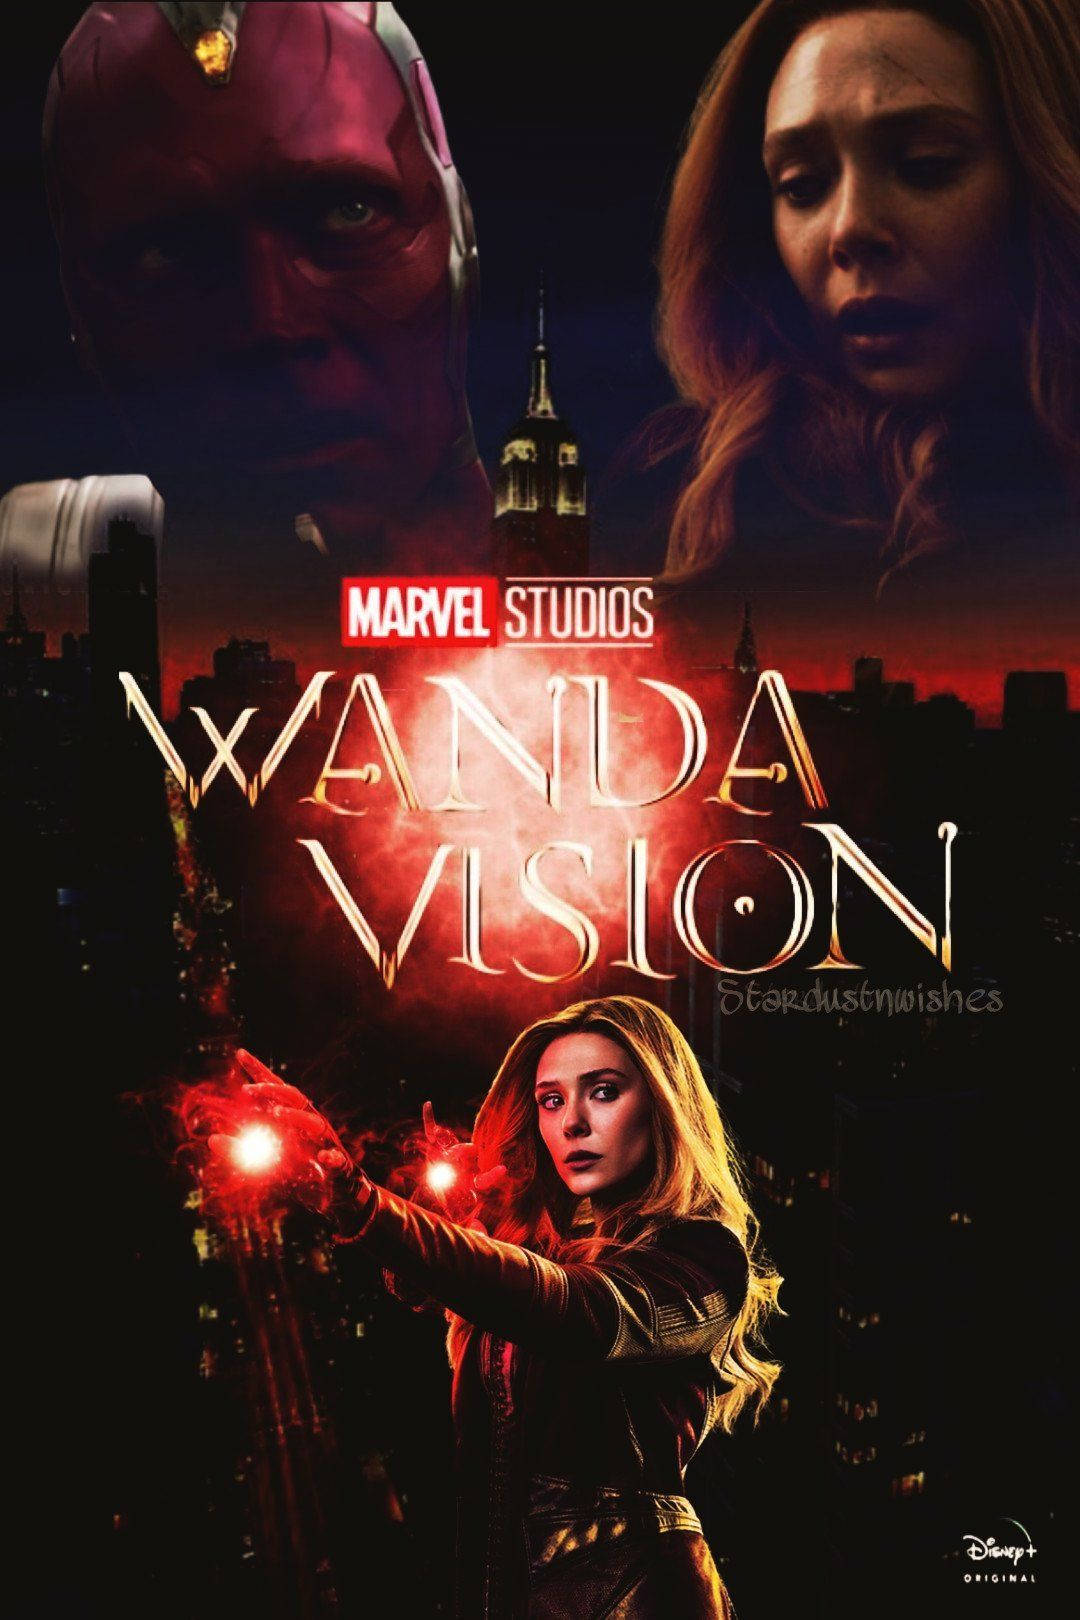 Wanda Maximoff And Vision Take Center Stage In This Fan-made Poster For Marvel's Wandavision. Background